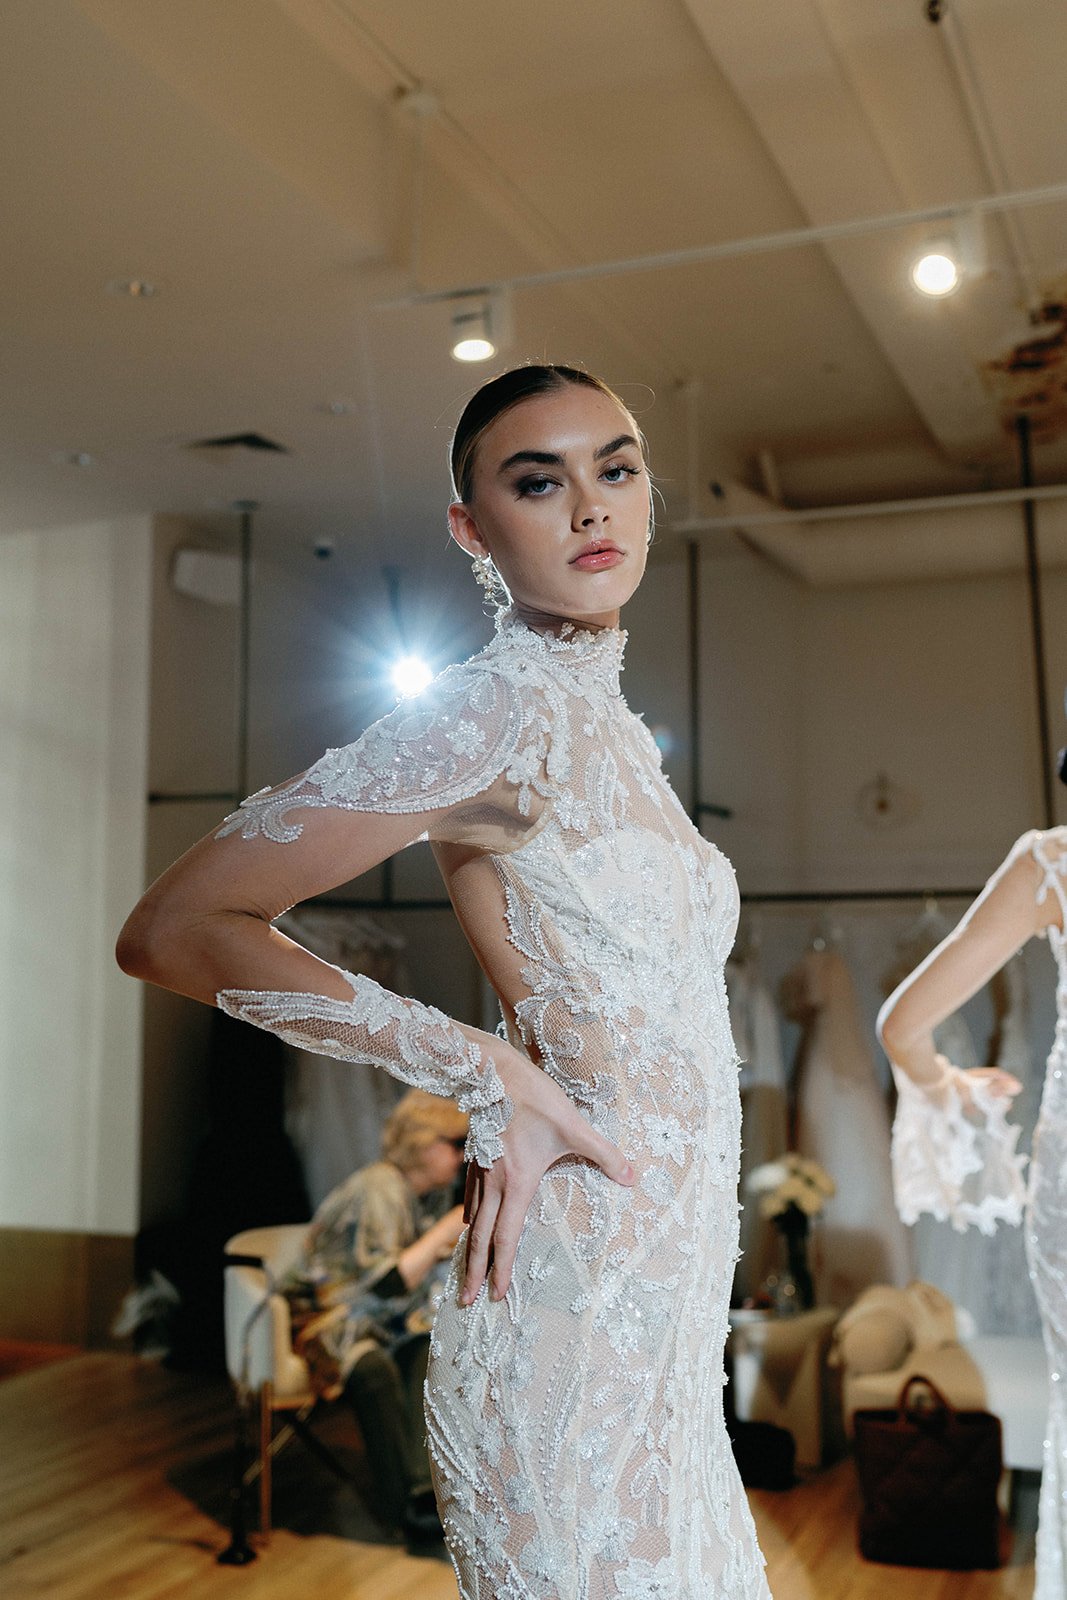 Galia Lahav Couture and Gala L’Etoile and Le Reve Collections — LWD